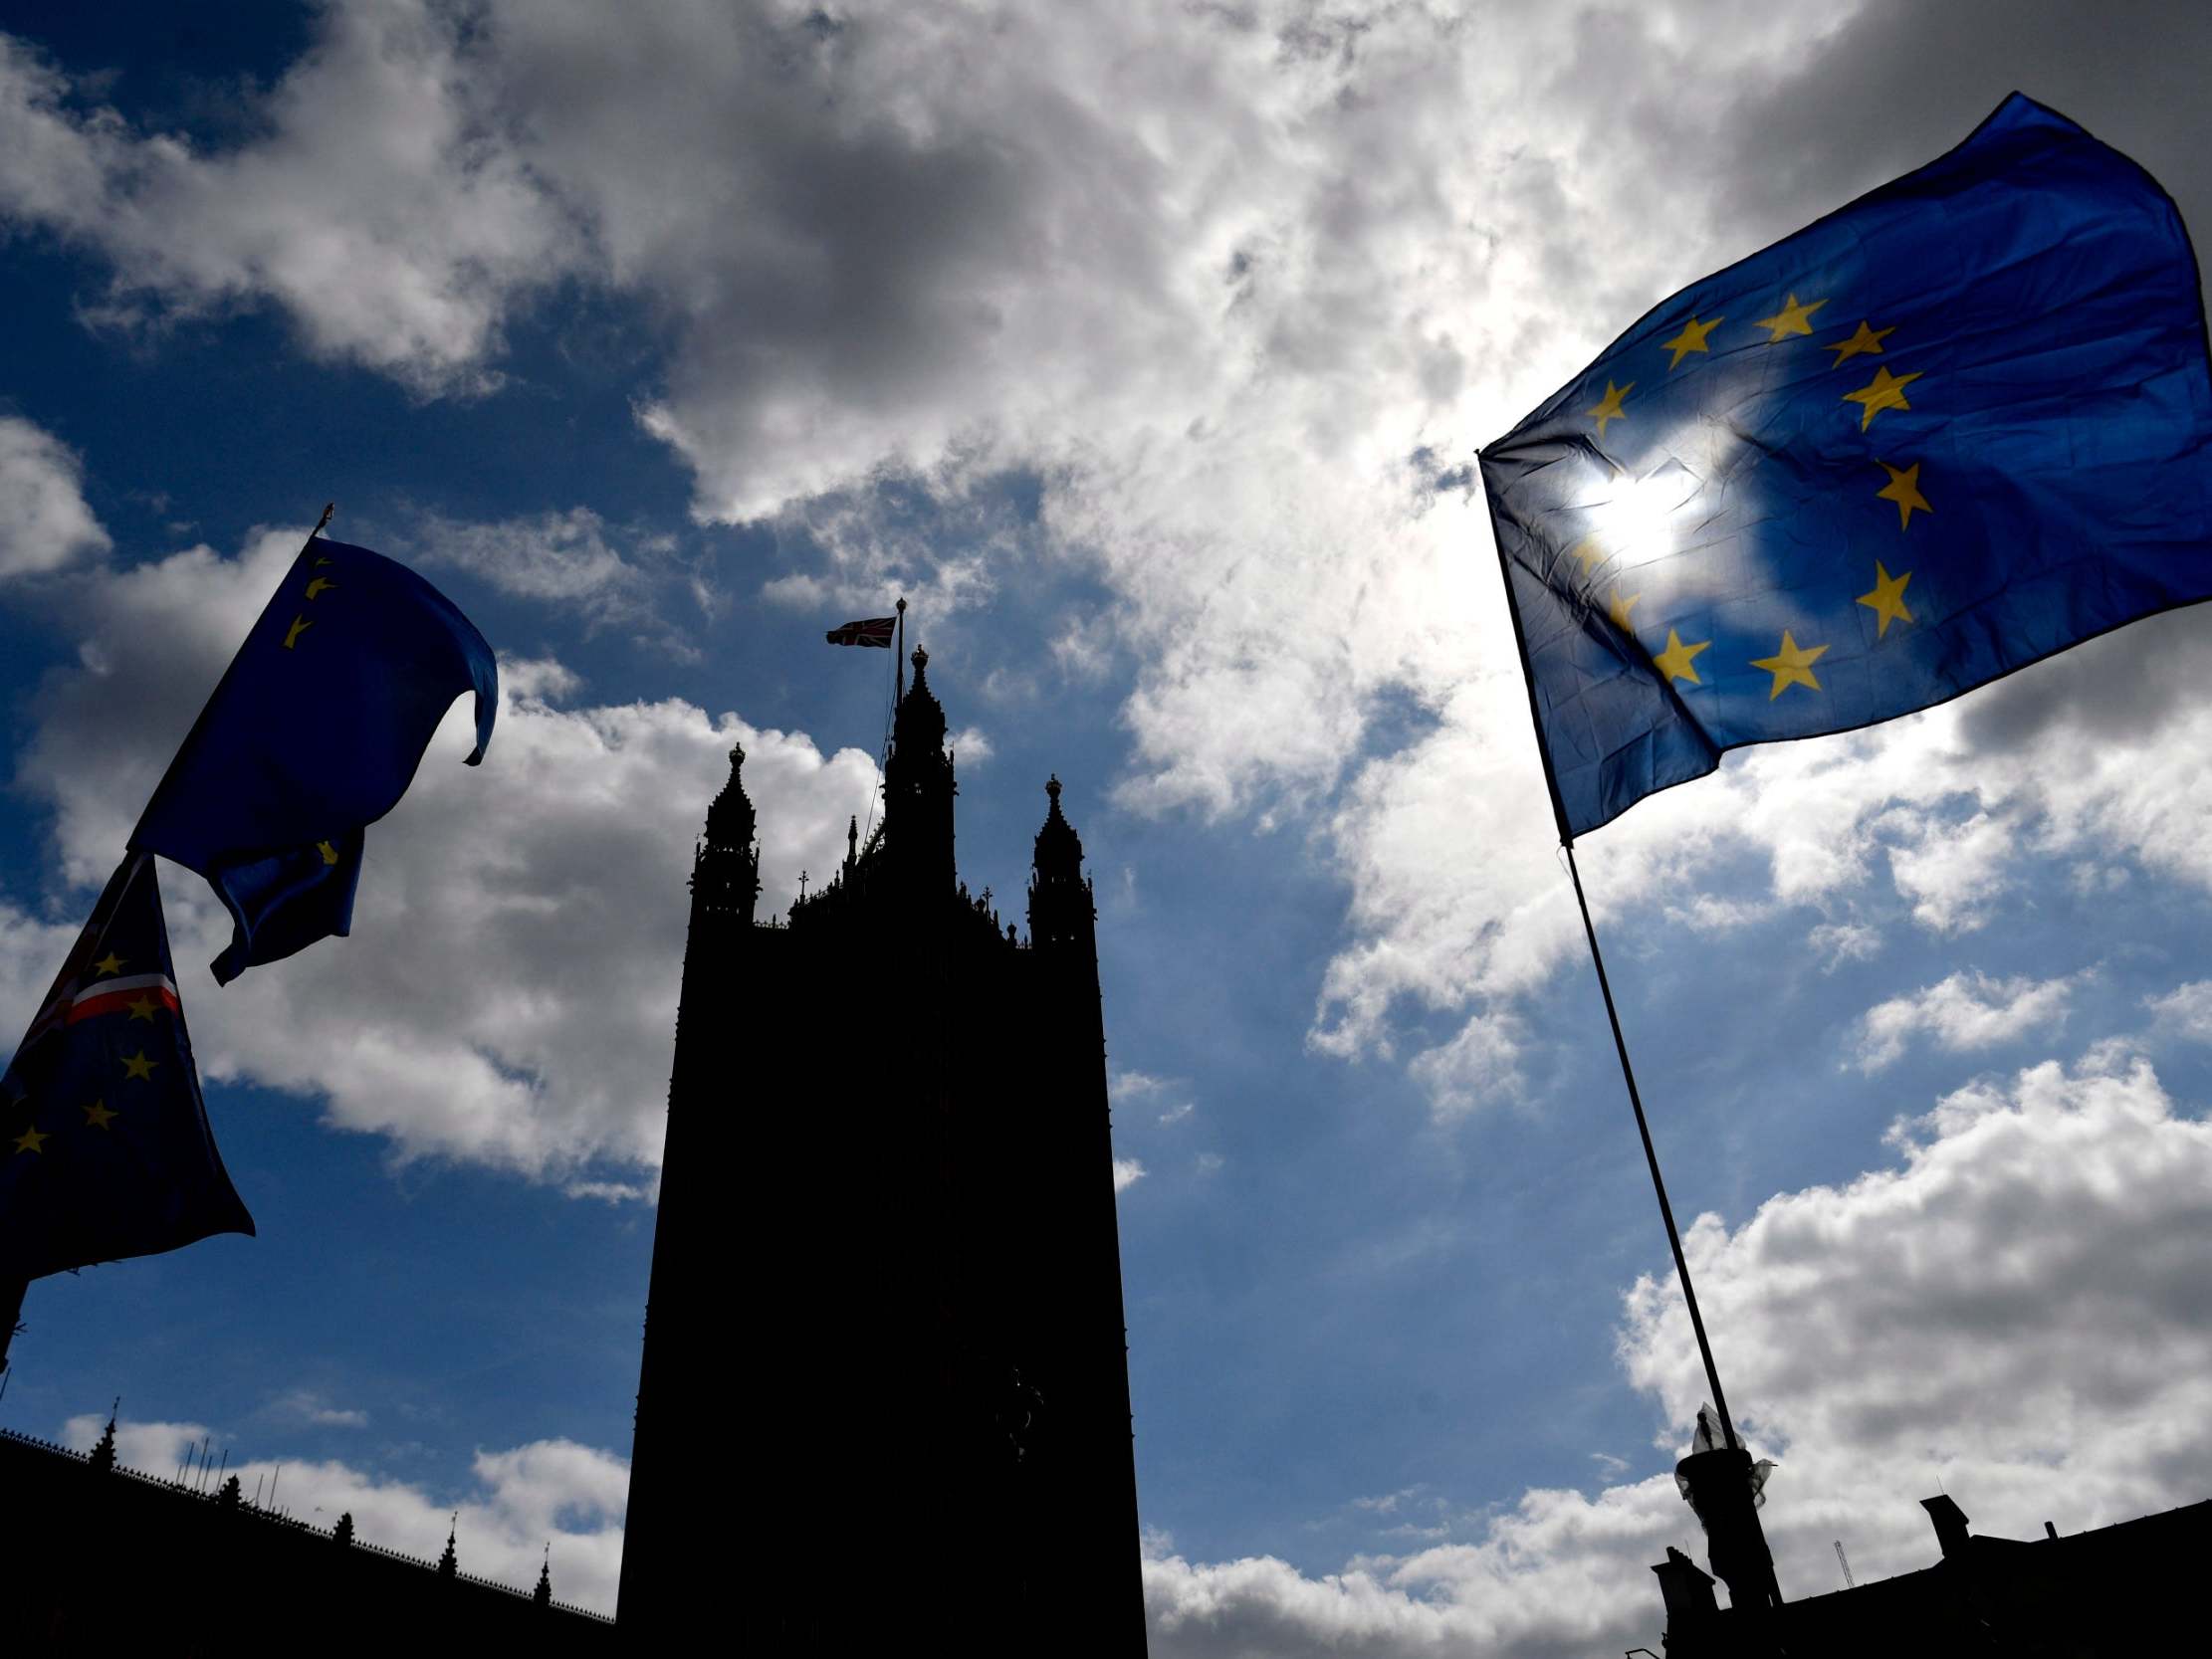 The EU flag flutters outside the Houses of Parliament